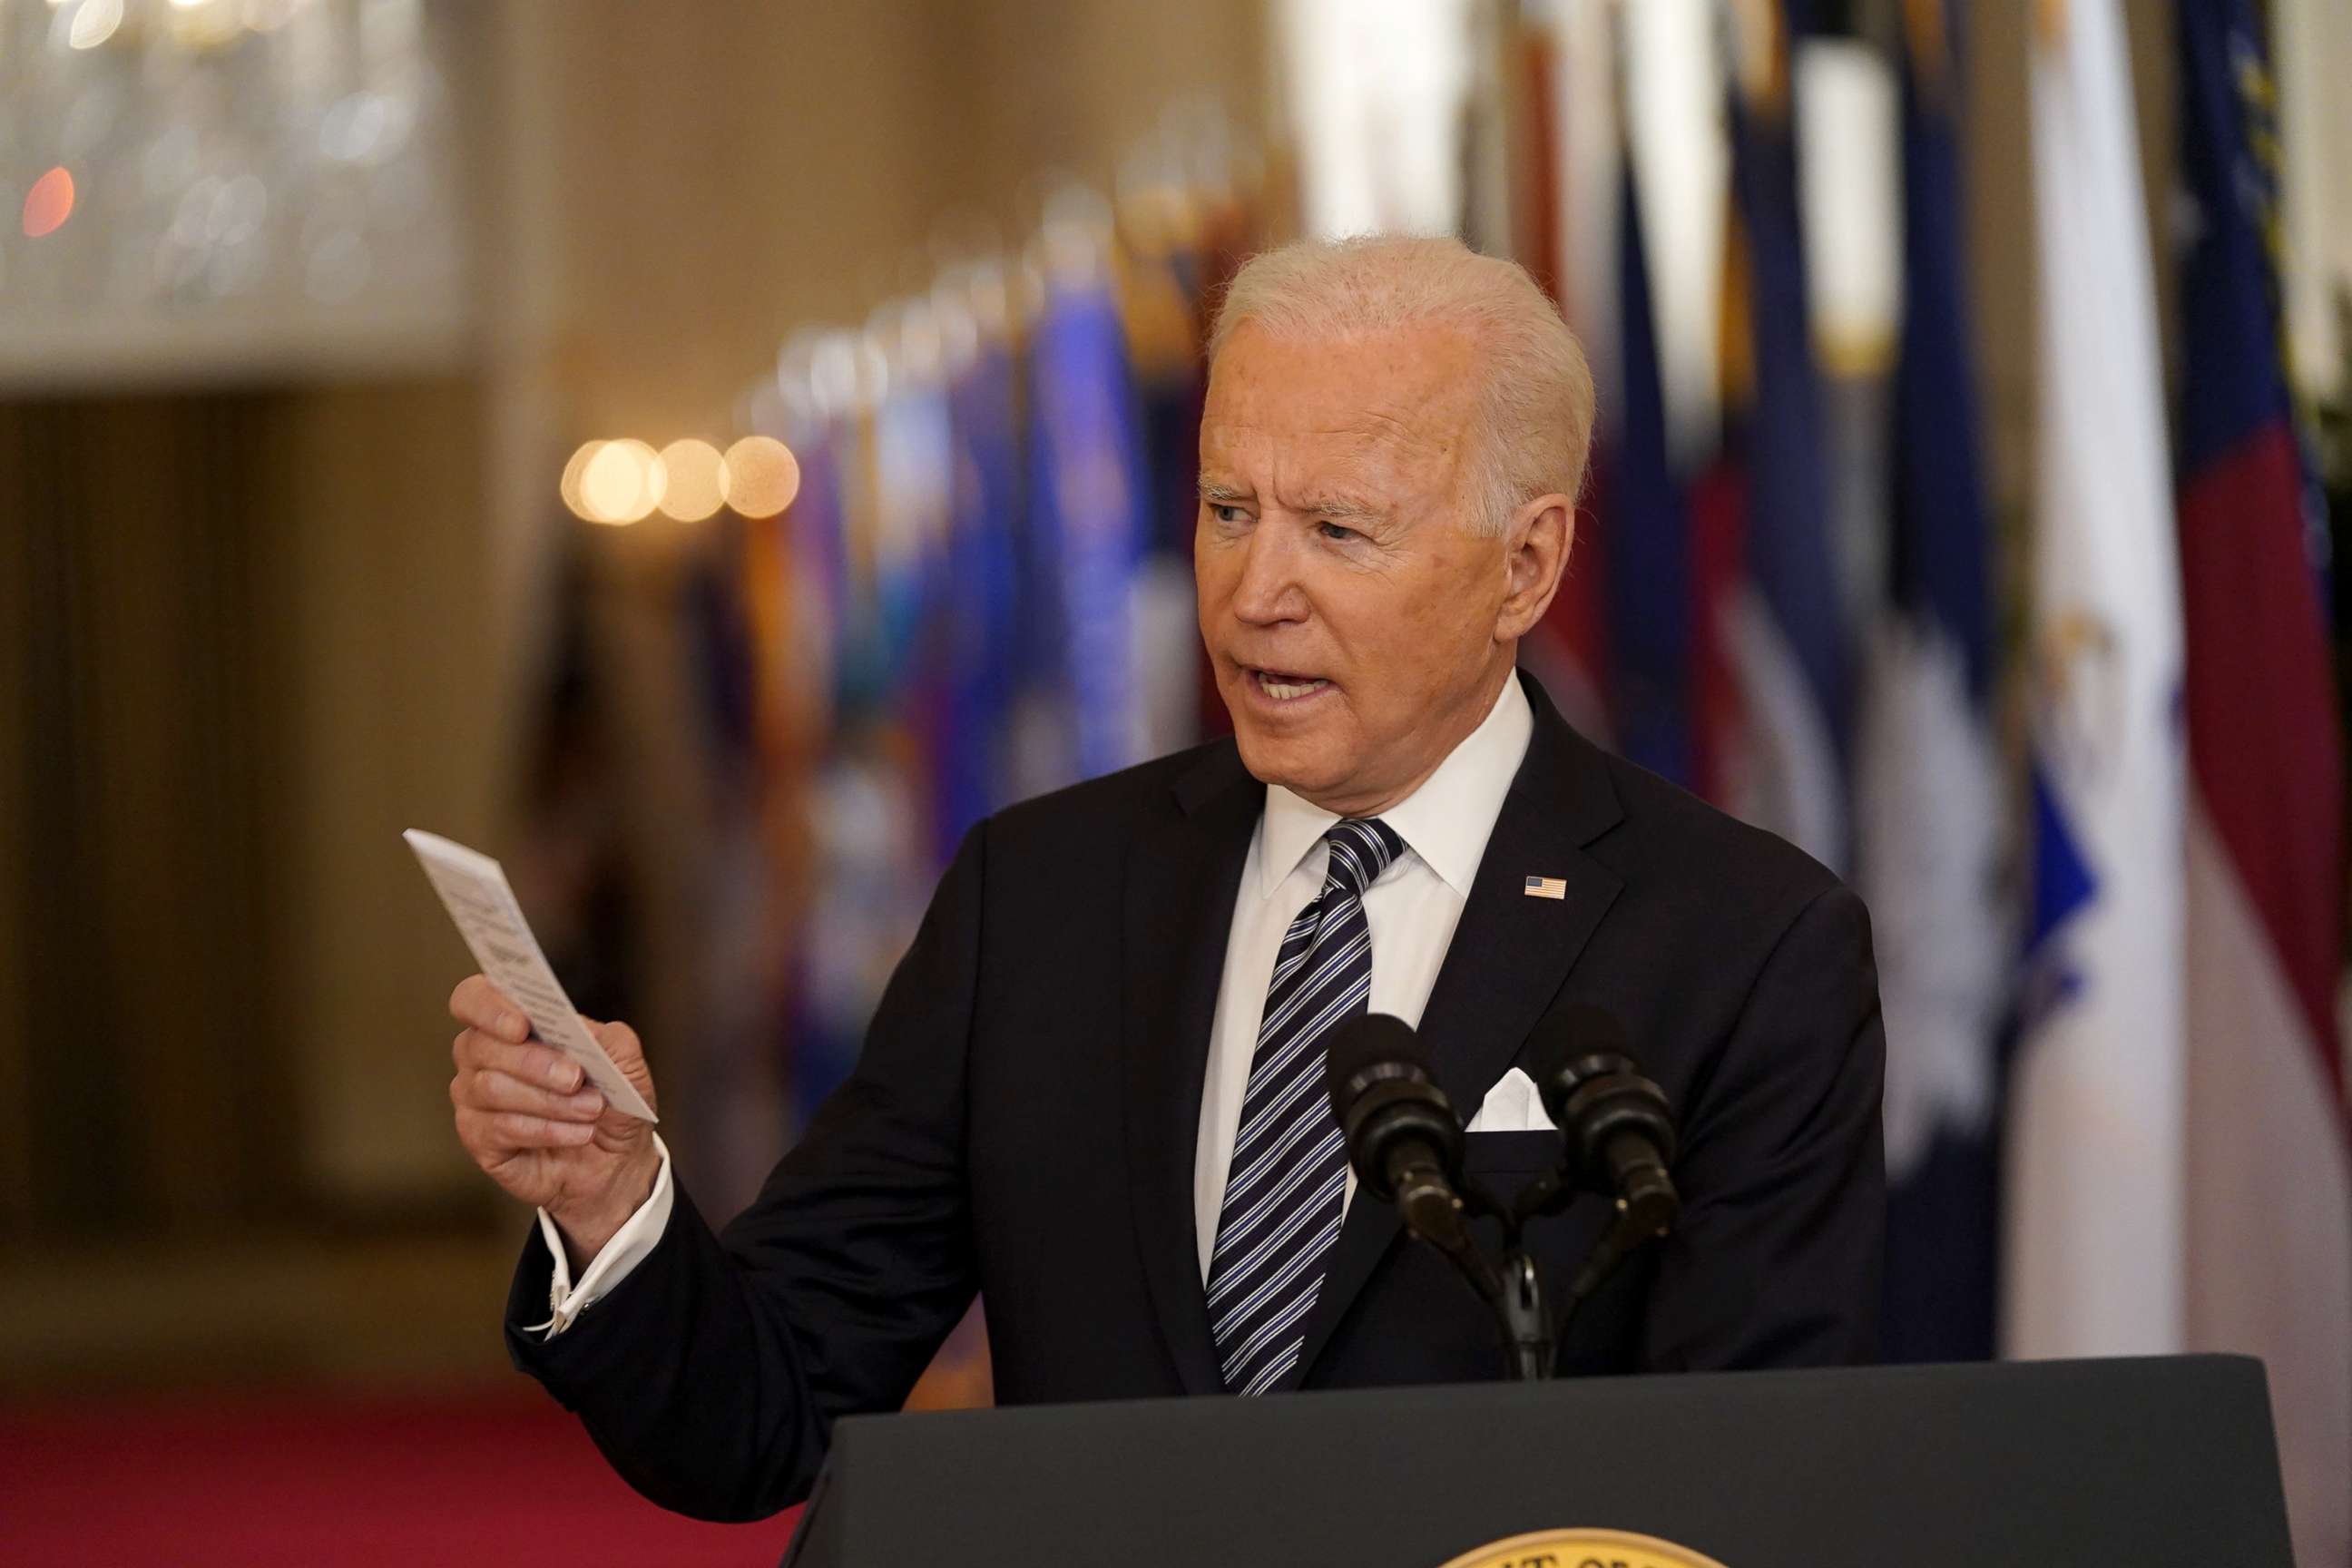 PHOTO: President Joe Biden delivers a nationally televised address to the nation on the one-year anniversary of the COVID-19 pandemic shutdown in the East Room of the White House in Washington, March 11, 2021.